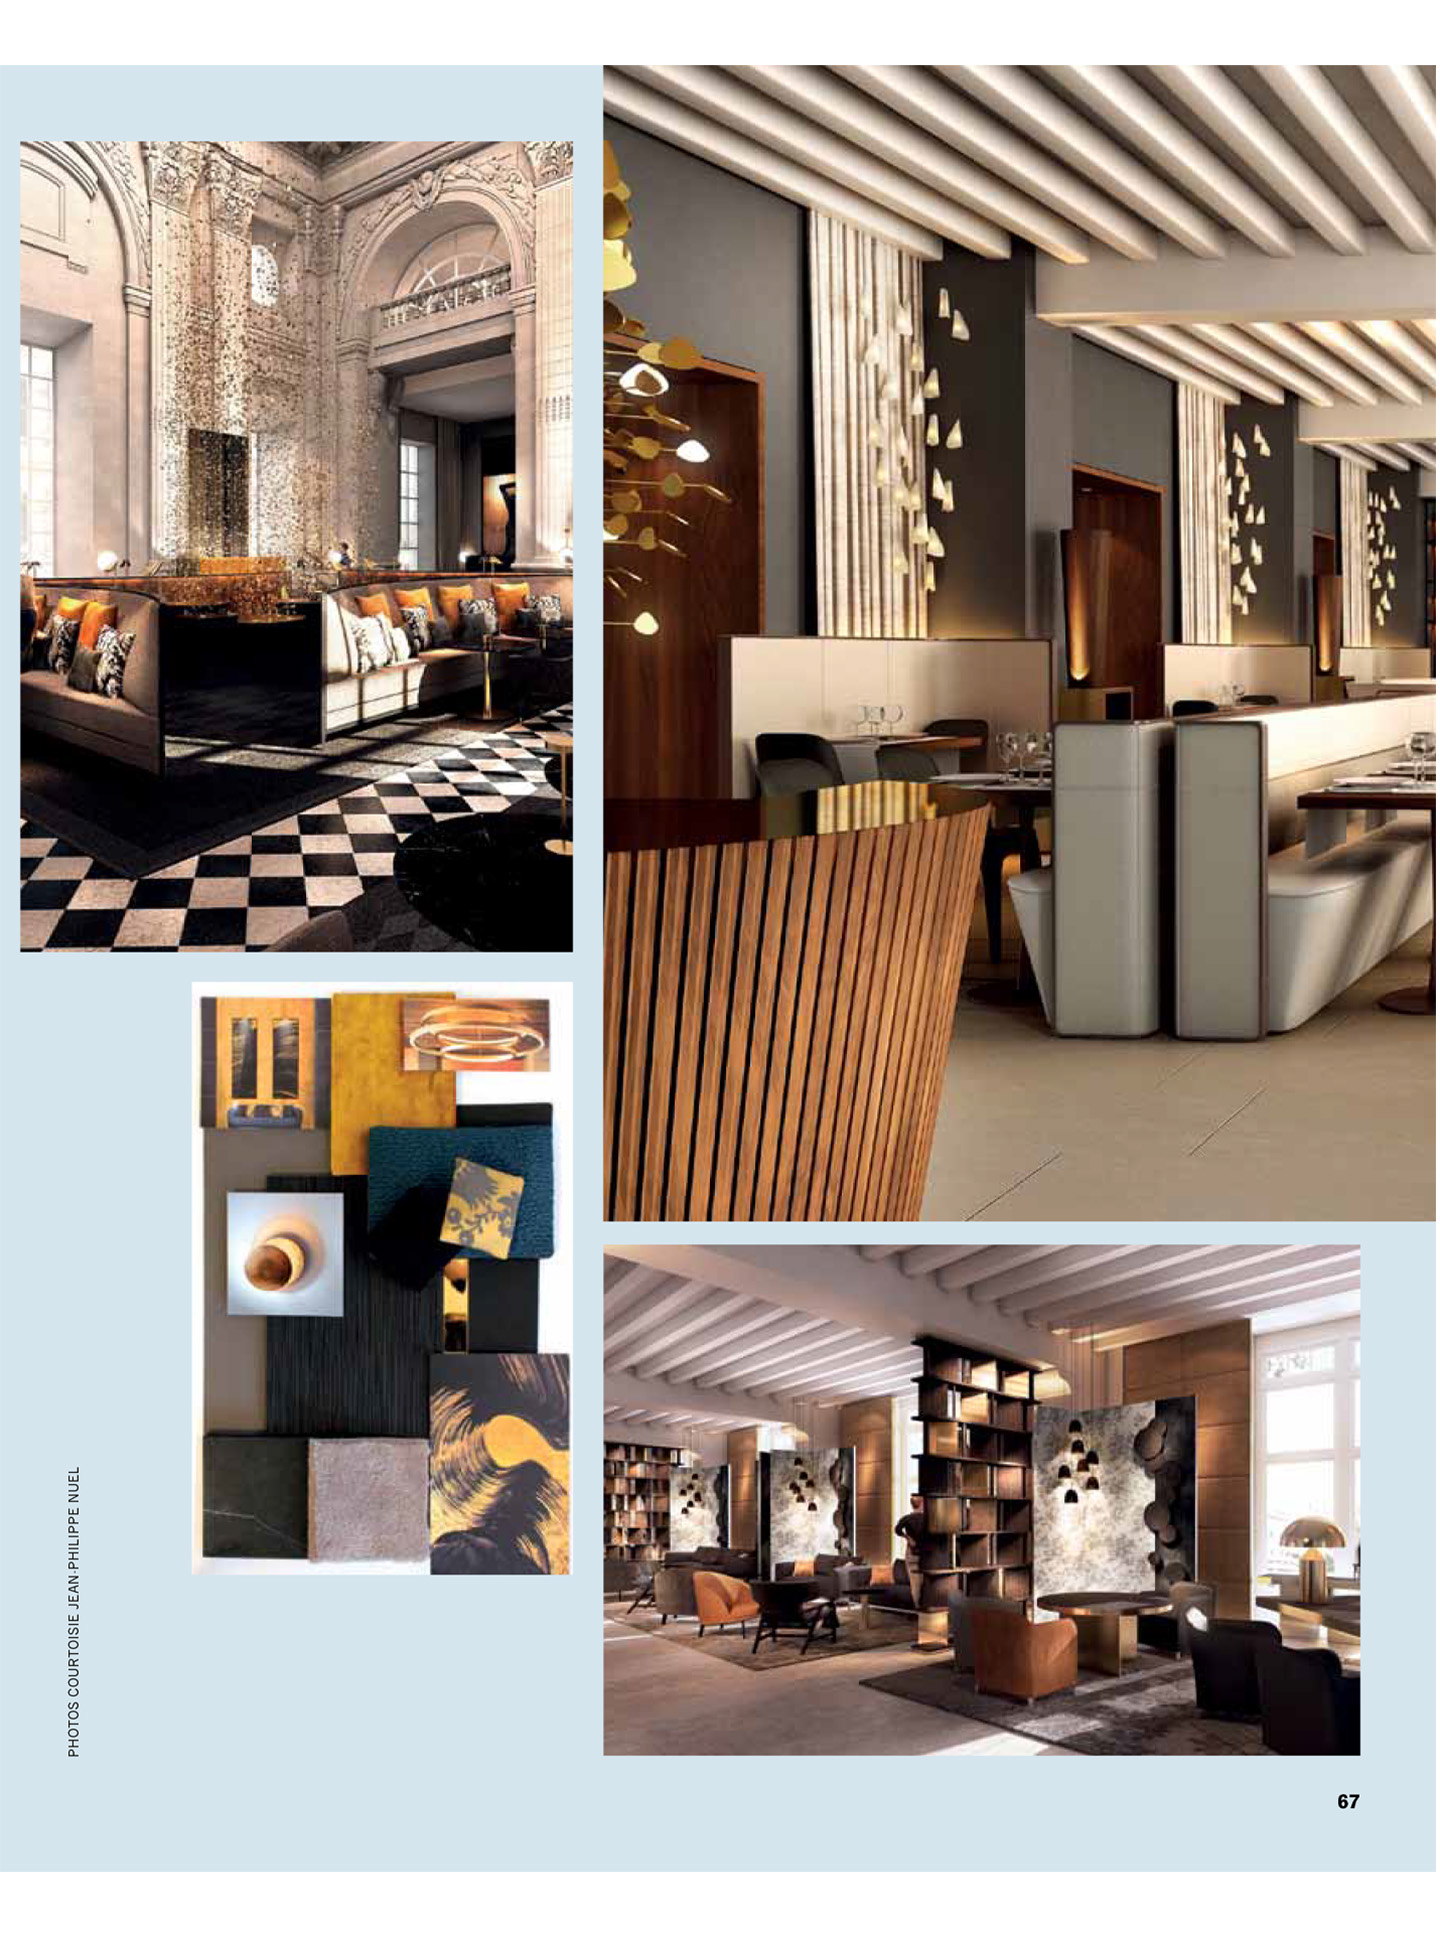 Article on the interior design studio specialized in luxury hotels jean-philippe nuel in the magazine L'officiel voyage